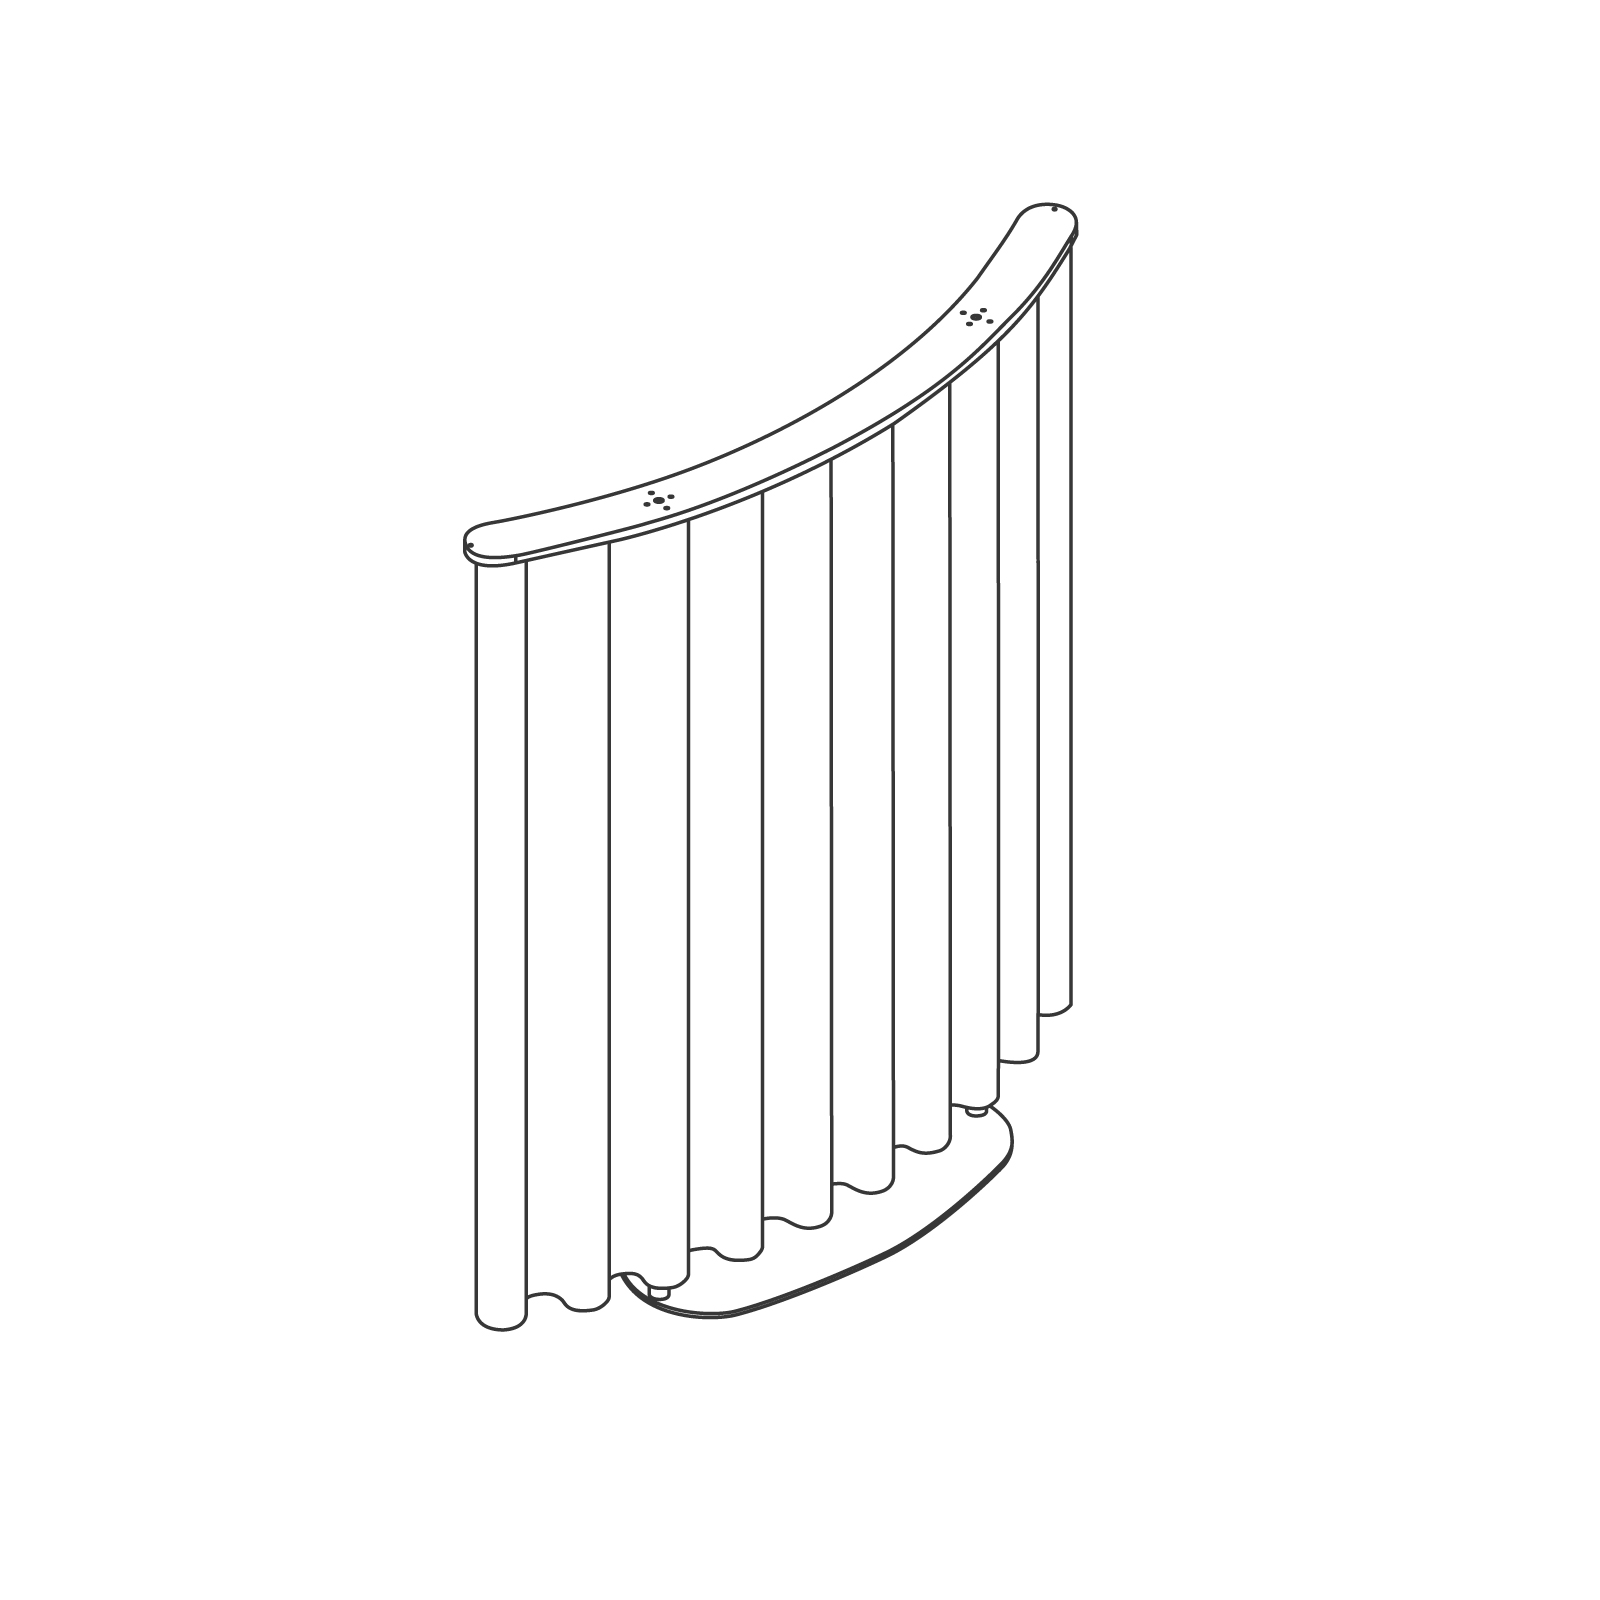 A line drawing - OE1 Freestanding Curtain–Curved